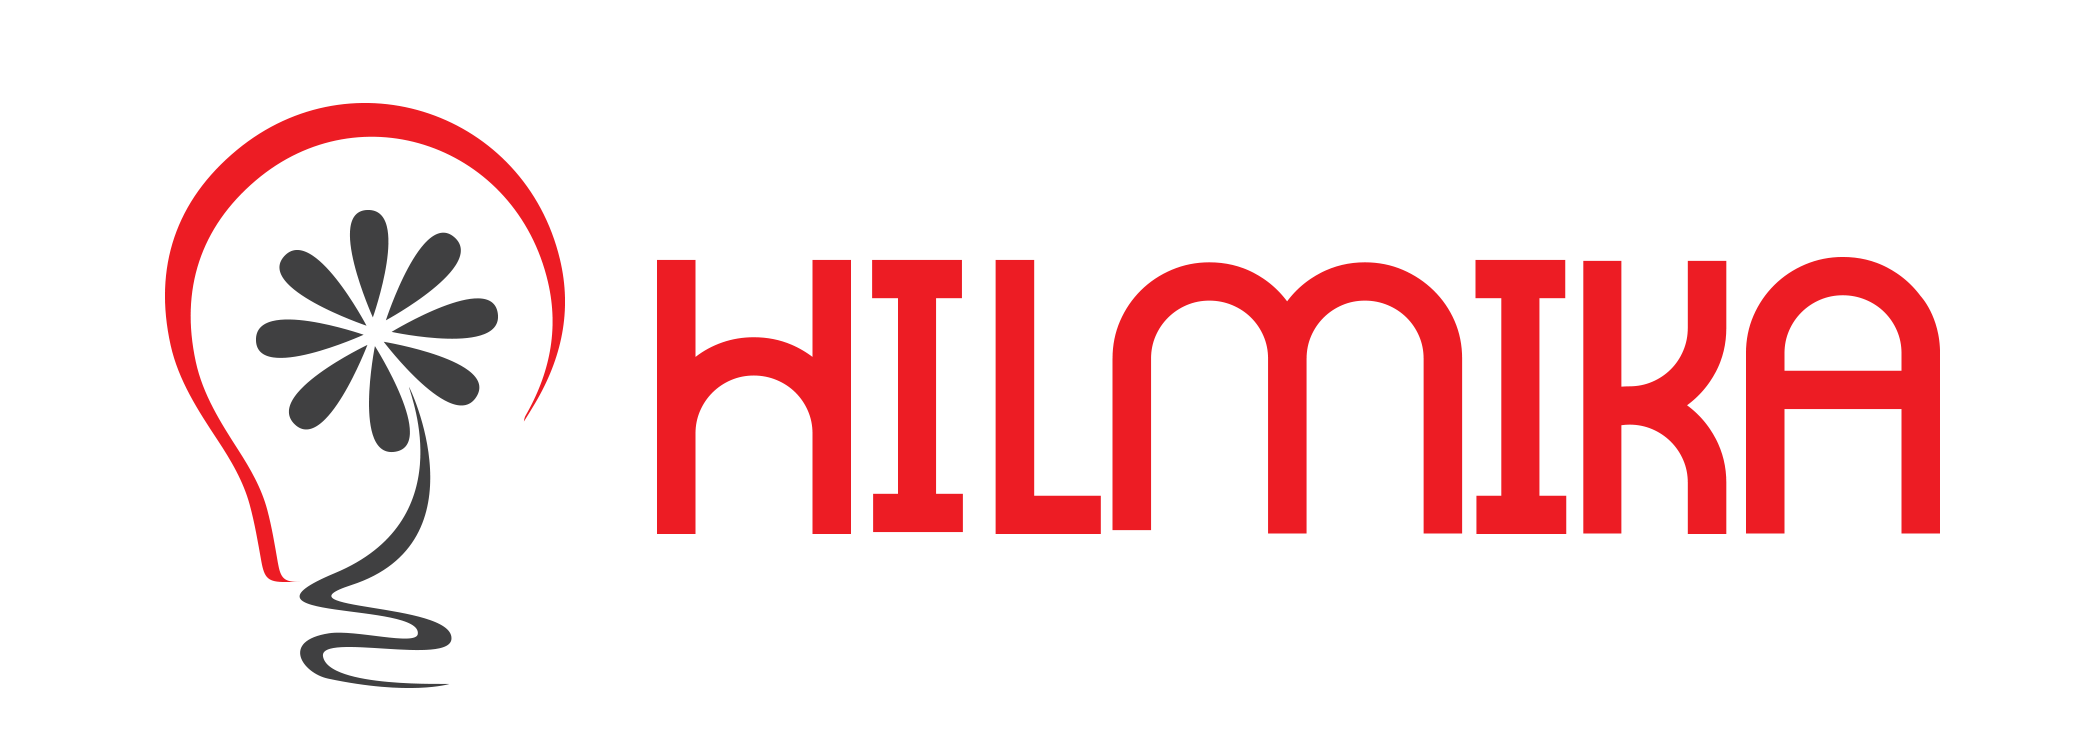 Hilmika Tech Solution PLC profile on Qualified.One